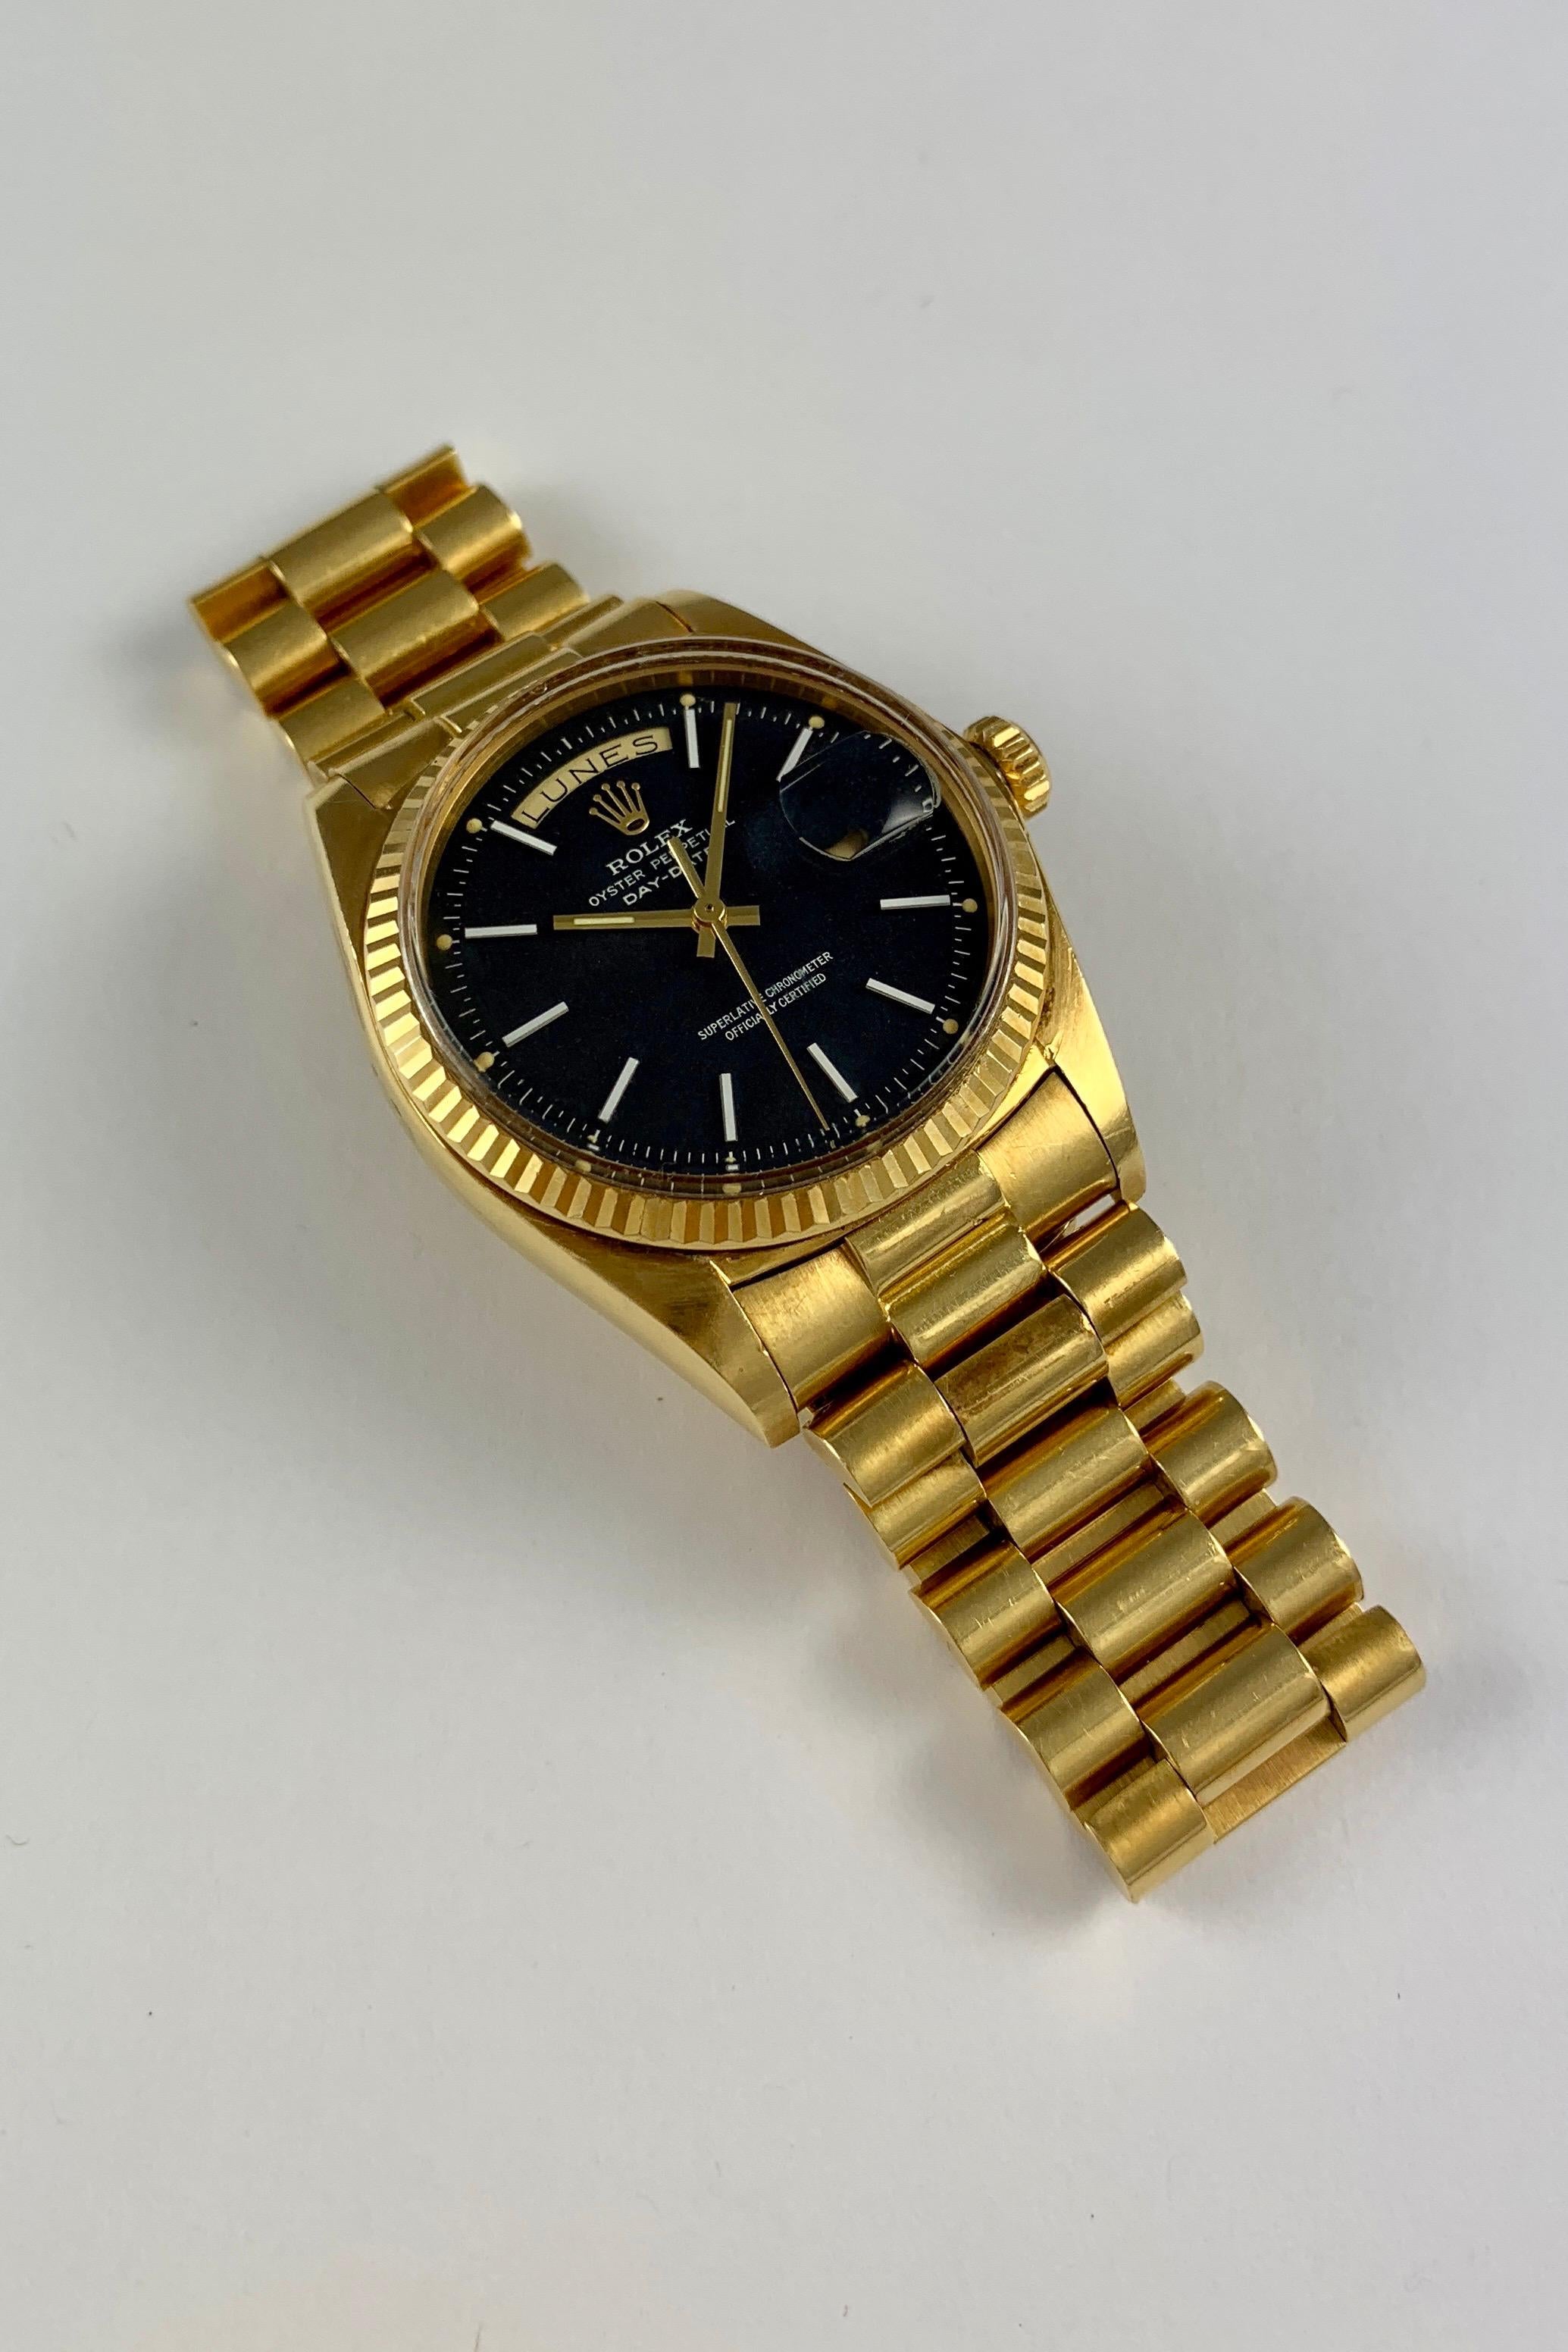 Rolex 18K Yellow Gold Day-Date Presidential Watch from the Early 1970's
Beautiful Factory Black Matte Confetti Dial with Rare White Applied Hour Markers and Perfect Lume Plots Below the Hour Markers
Yellow Gold Fluted Bezel
18K Yellow Gold Case
36mm